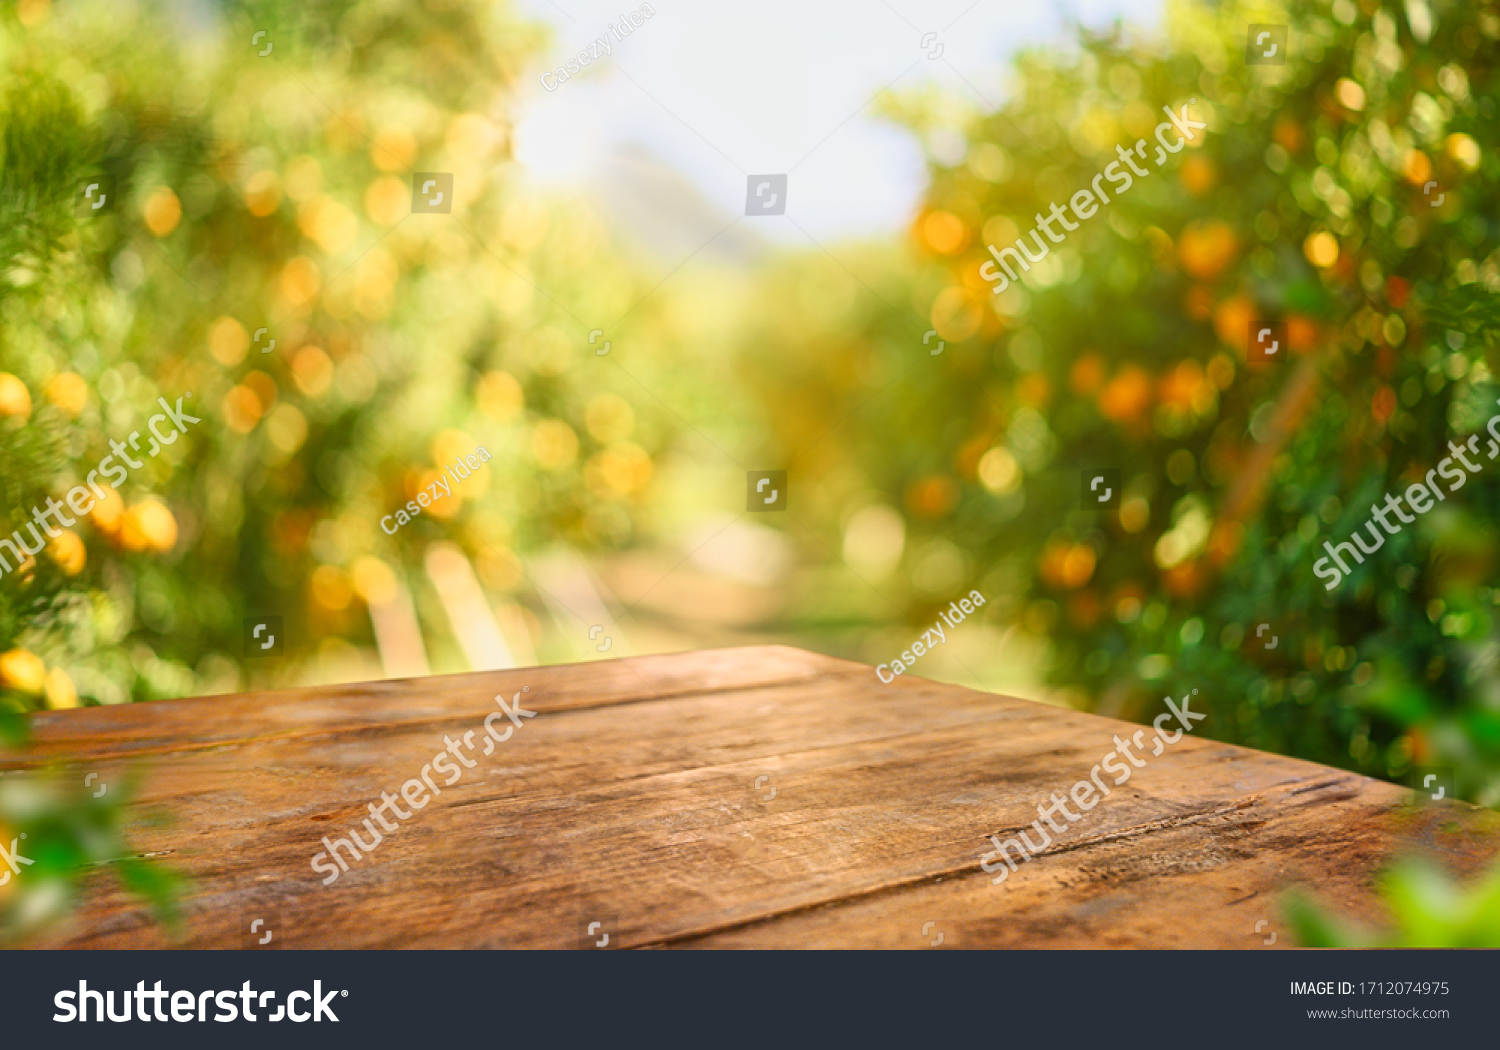 Empty wood table with free space over orange trees, orange field background. For product display montage #1712074975